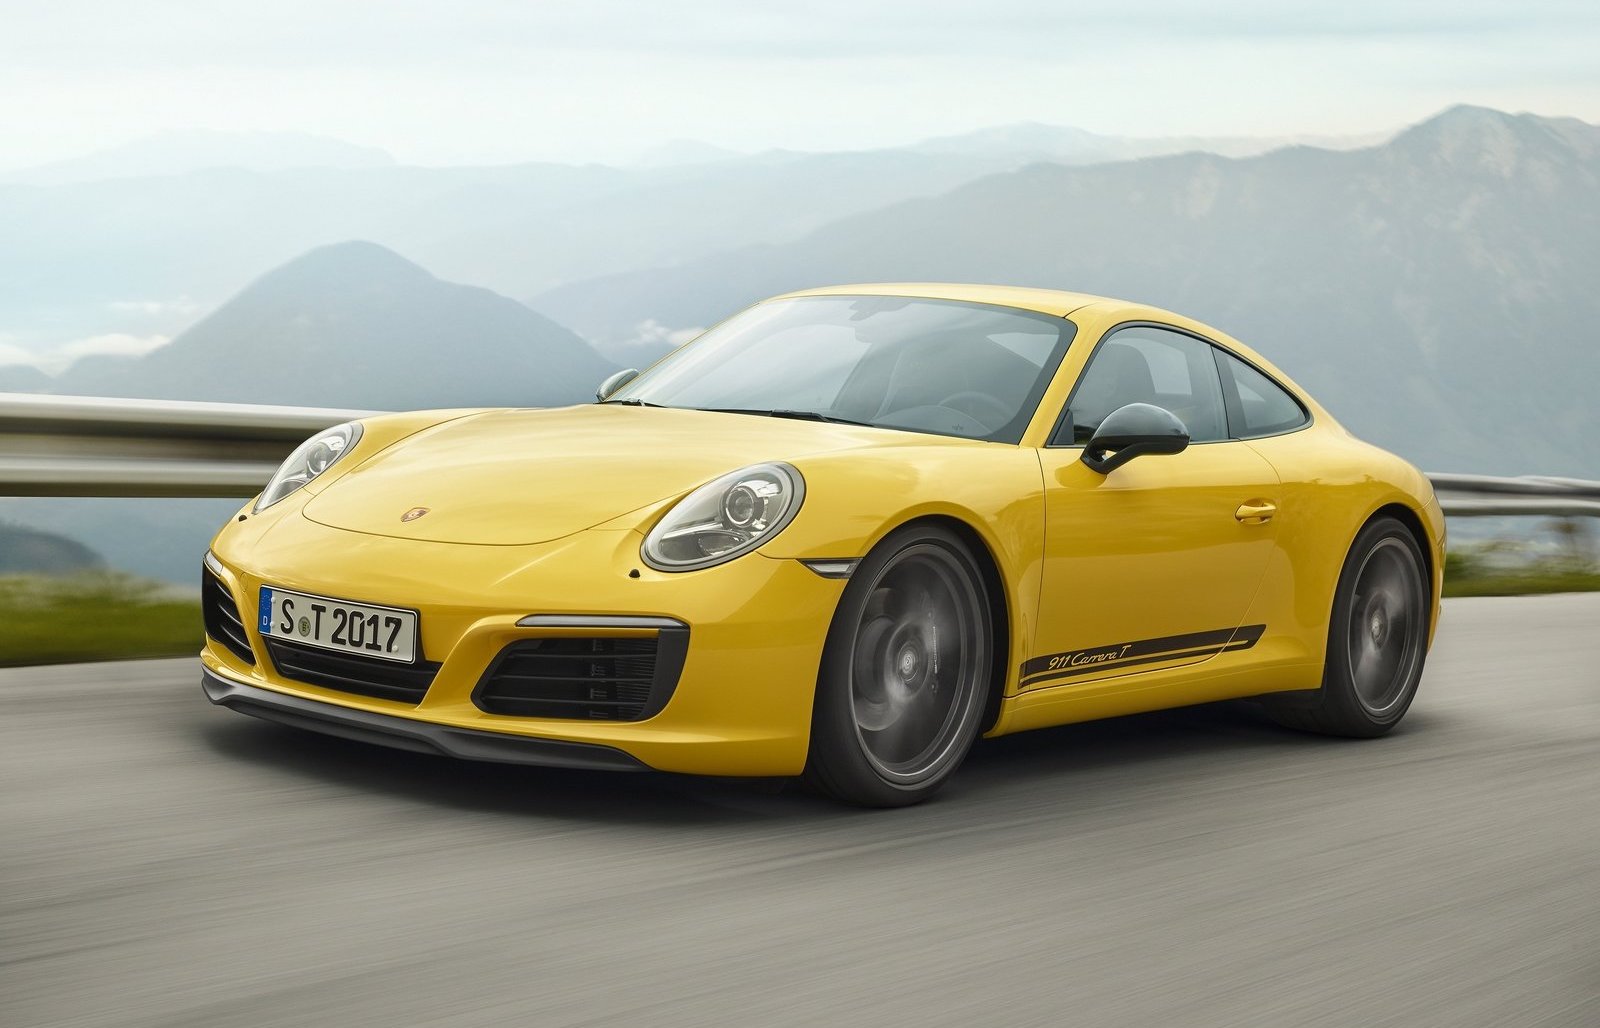 Porsche sets another annual sales record, 2018 figures up 4%